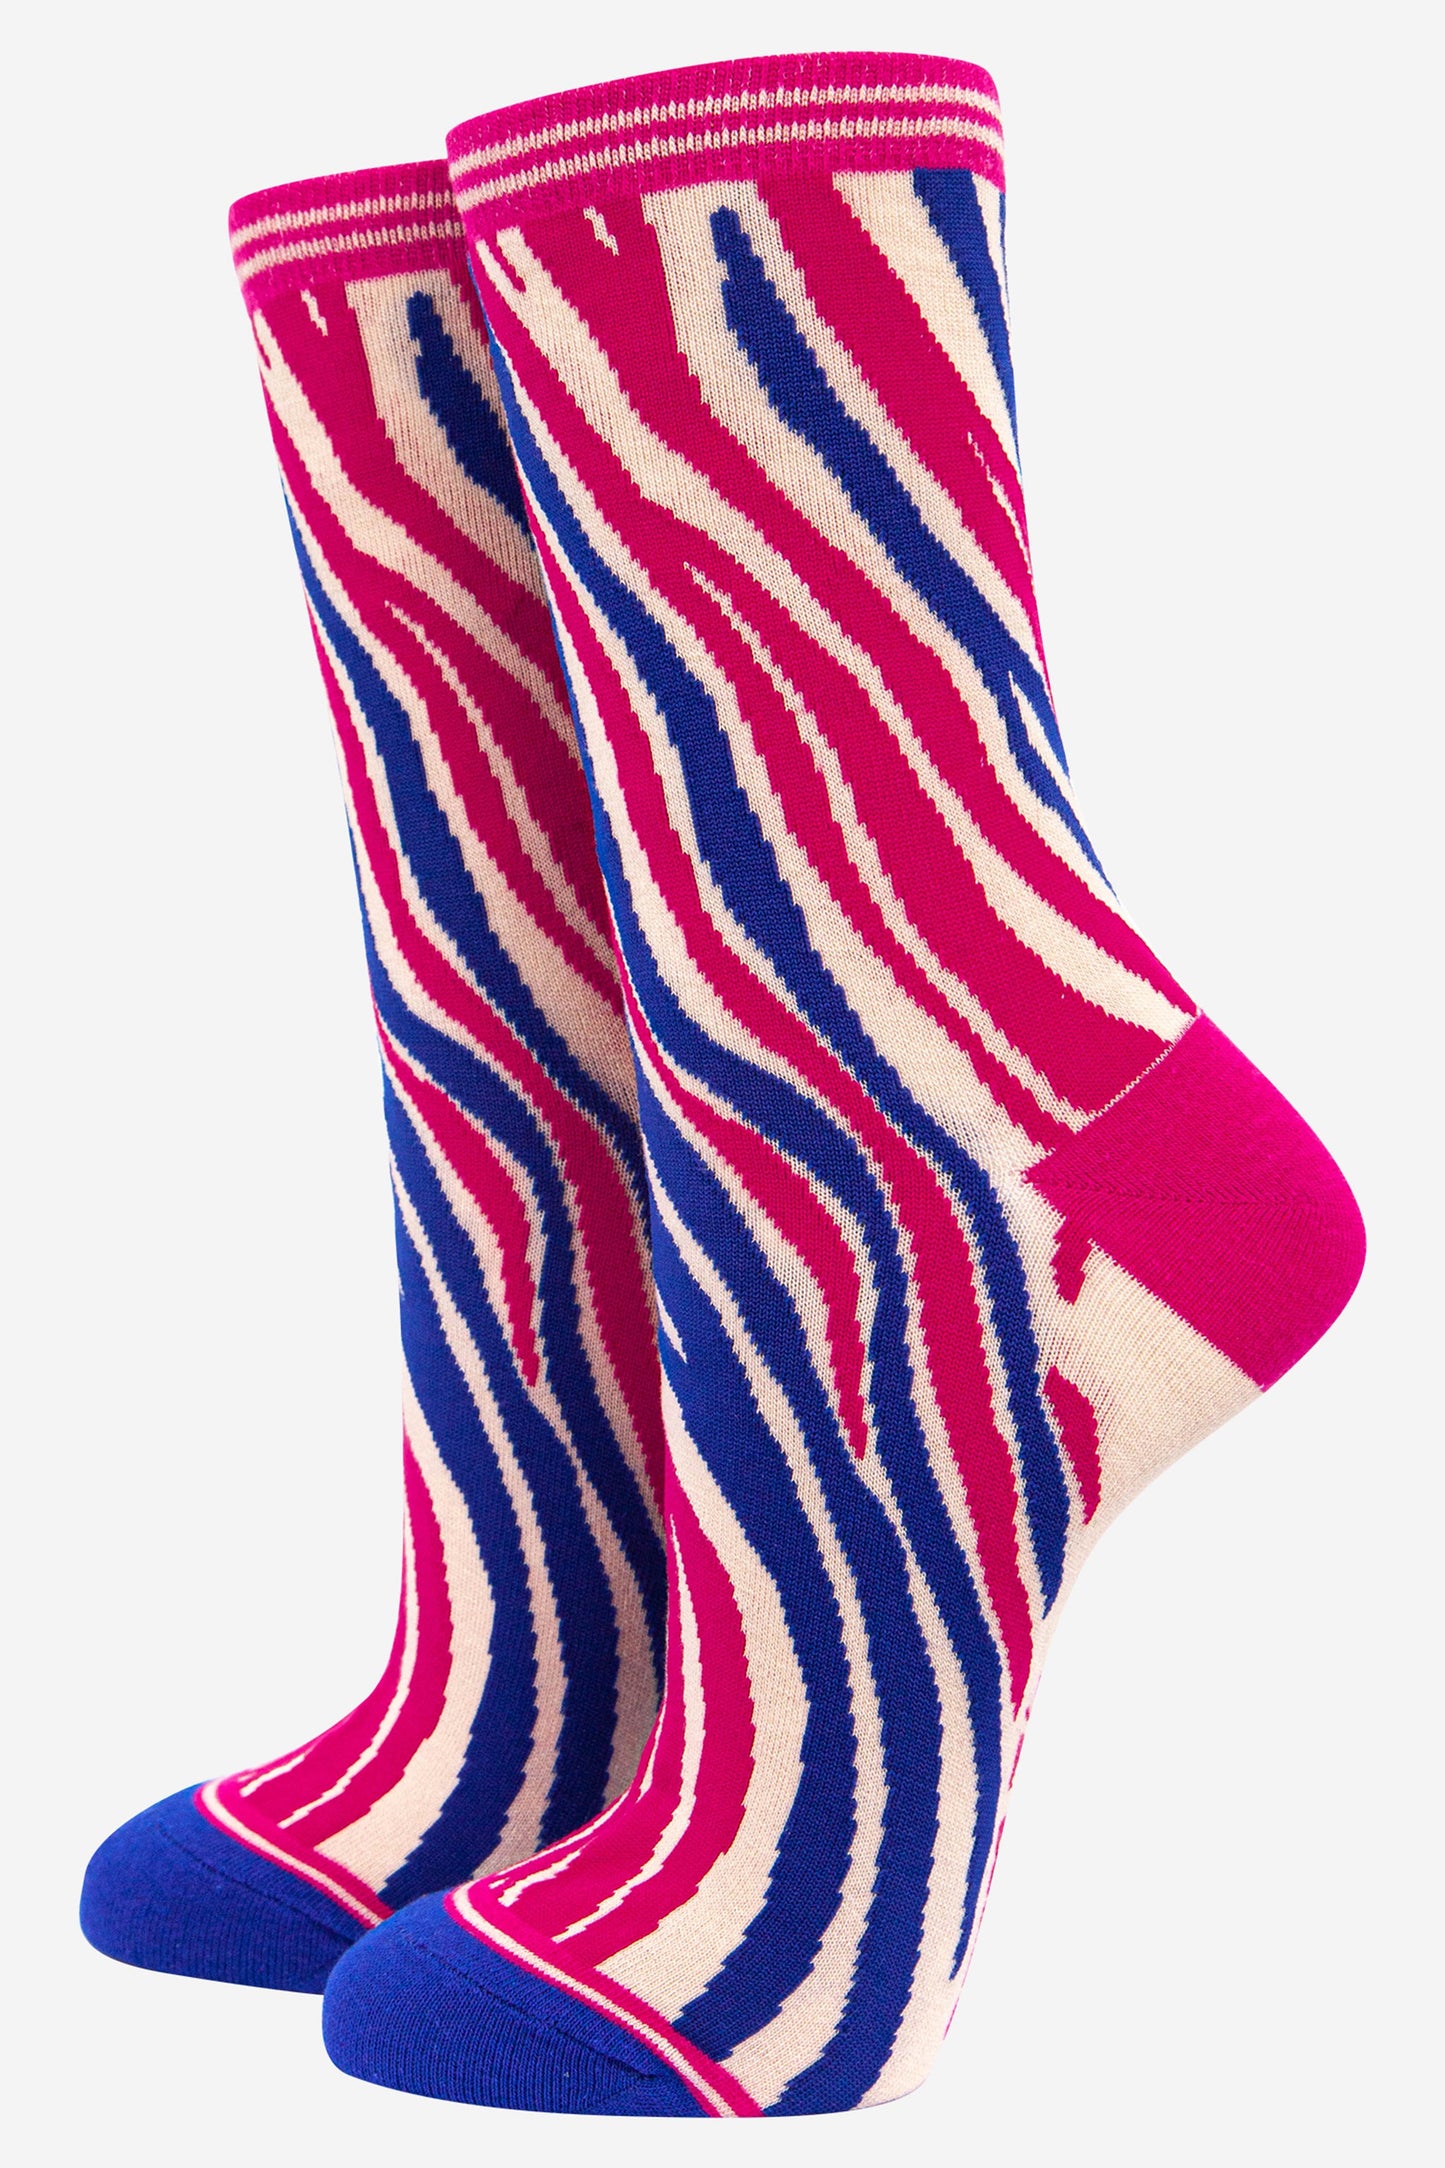 bamboo ankle socks with an all over pink and blue zebra print pattern